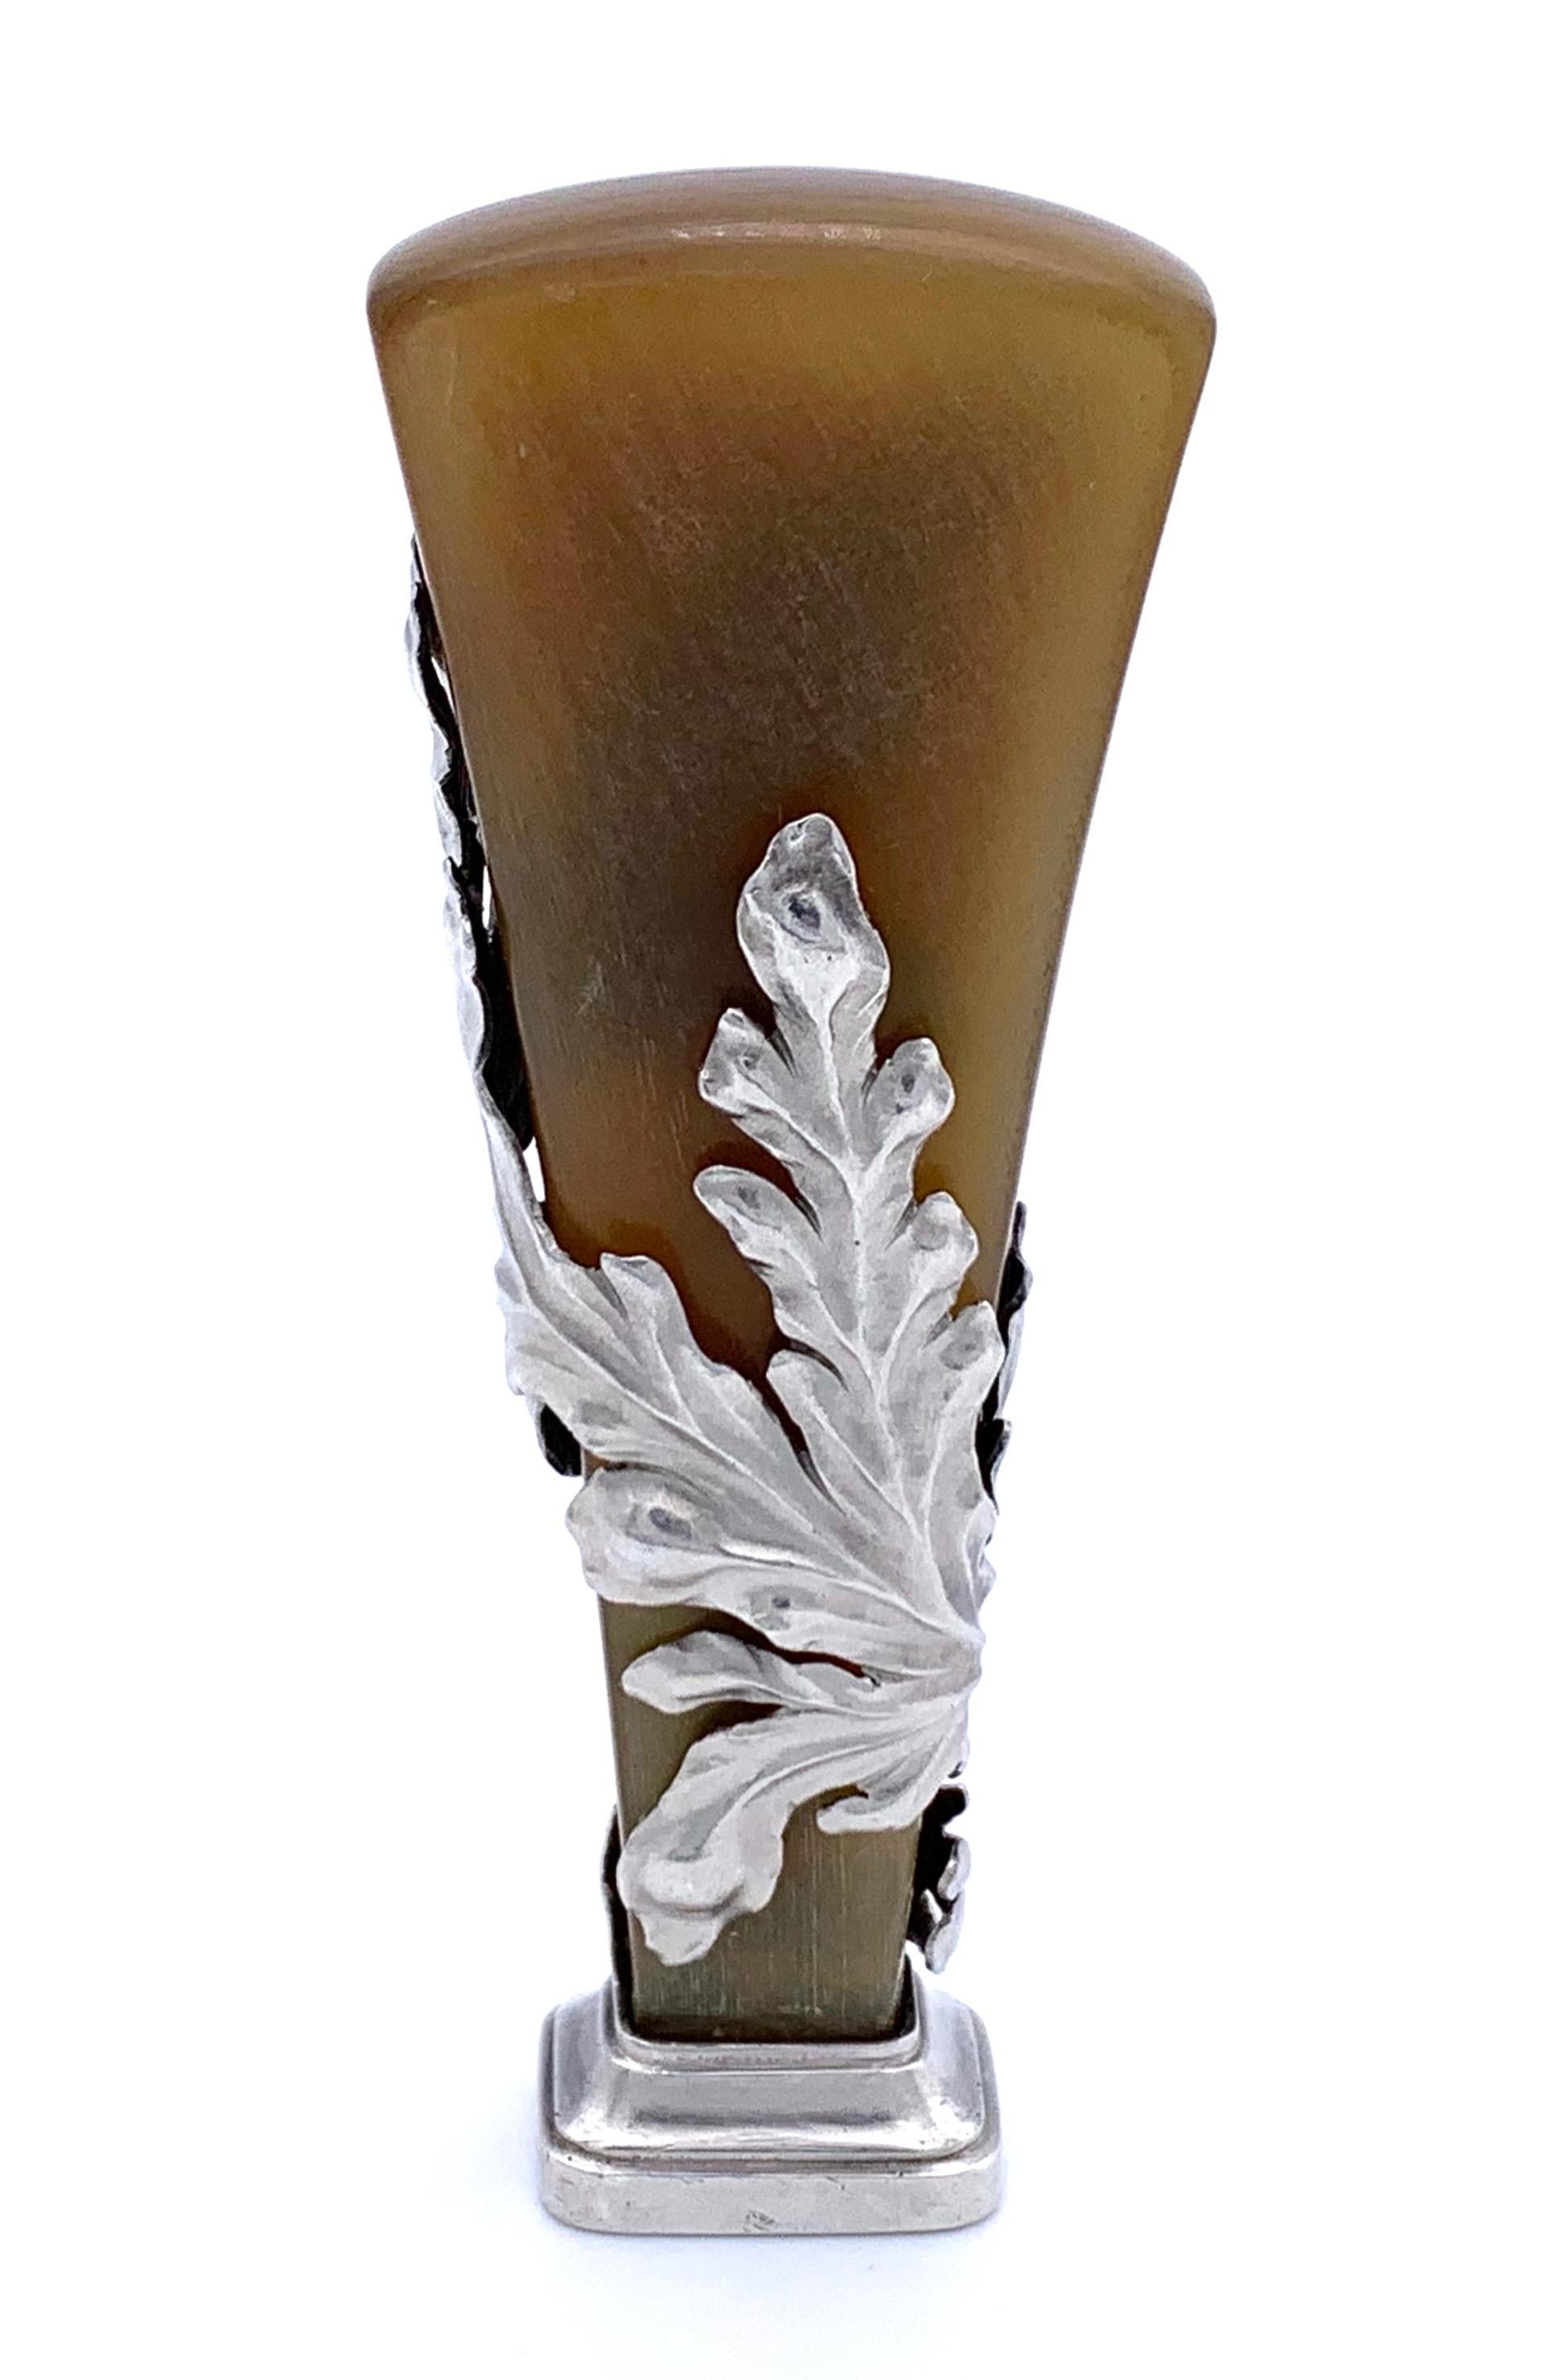 Silver acanthus foliage seal with a horn handle.
French makers mark in a lozenge, silver hallmarks.
The bottom side of the seal has never been used and can be engraved.
1895 ca.